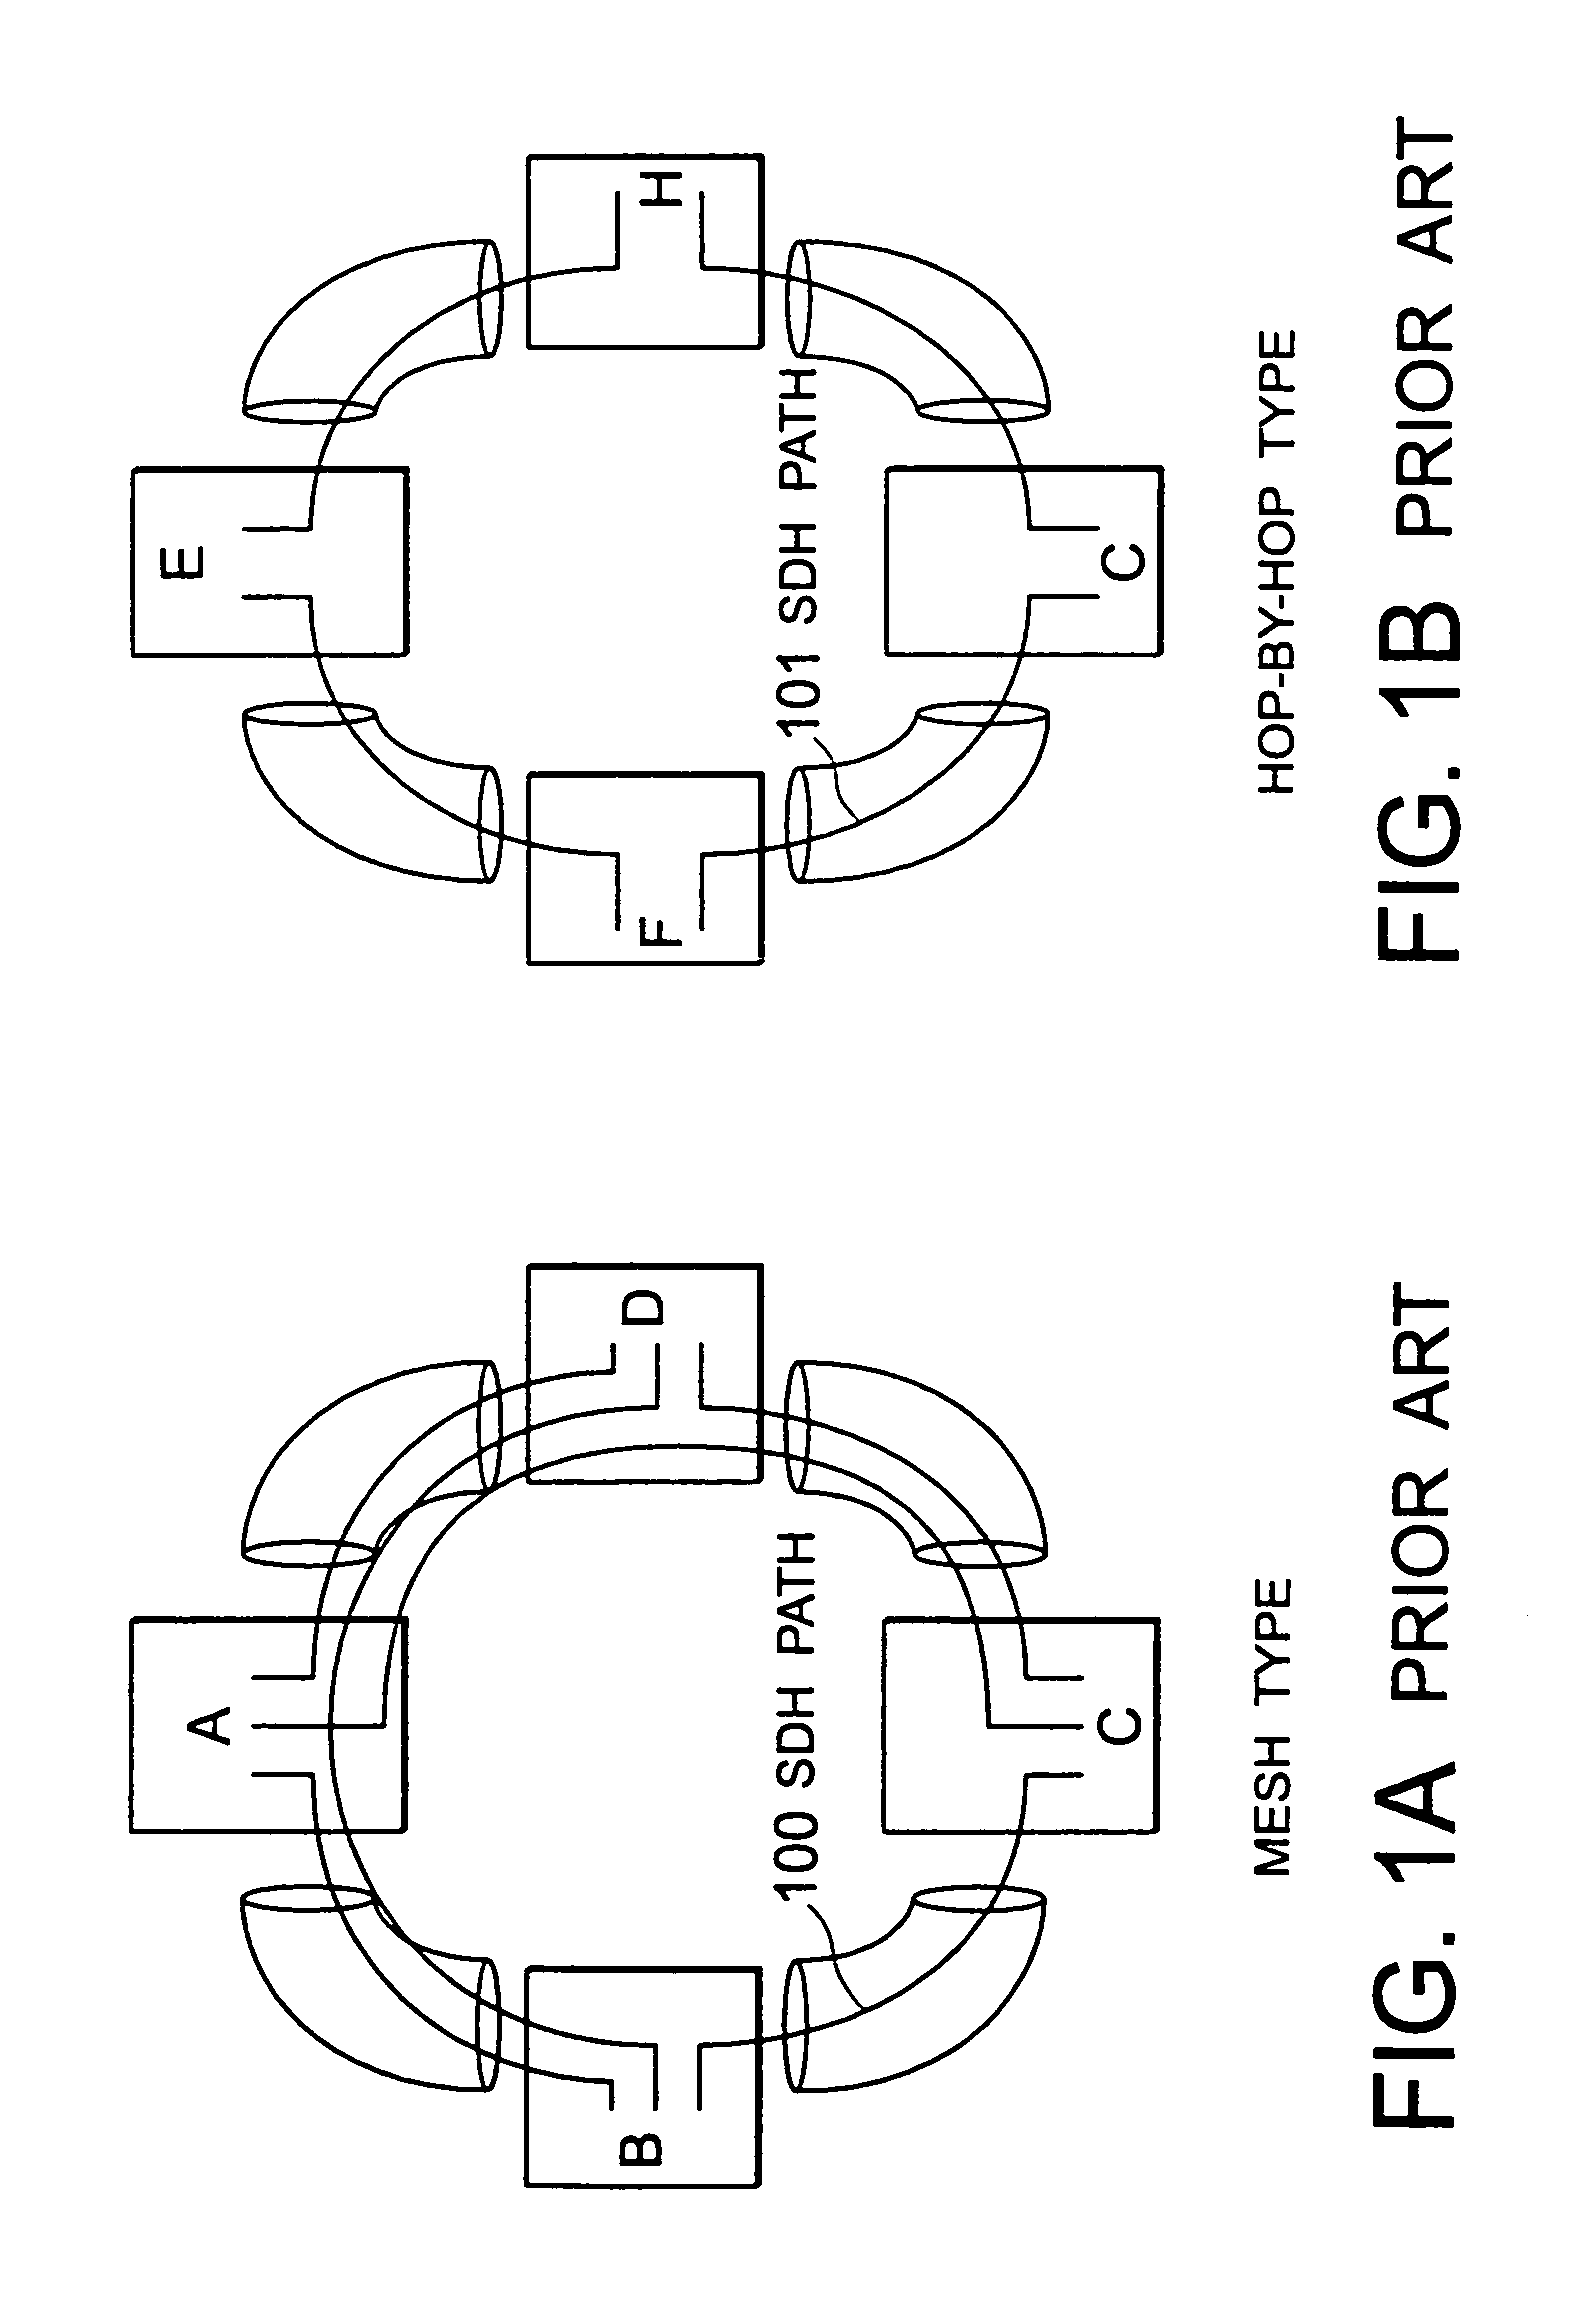 Node capable of saving a third layer packet handling operation in a synchronous optical network